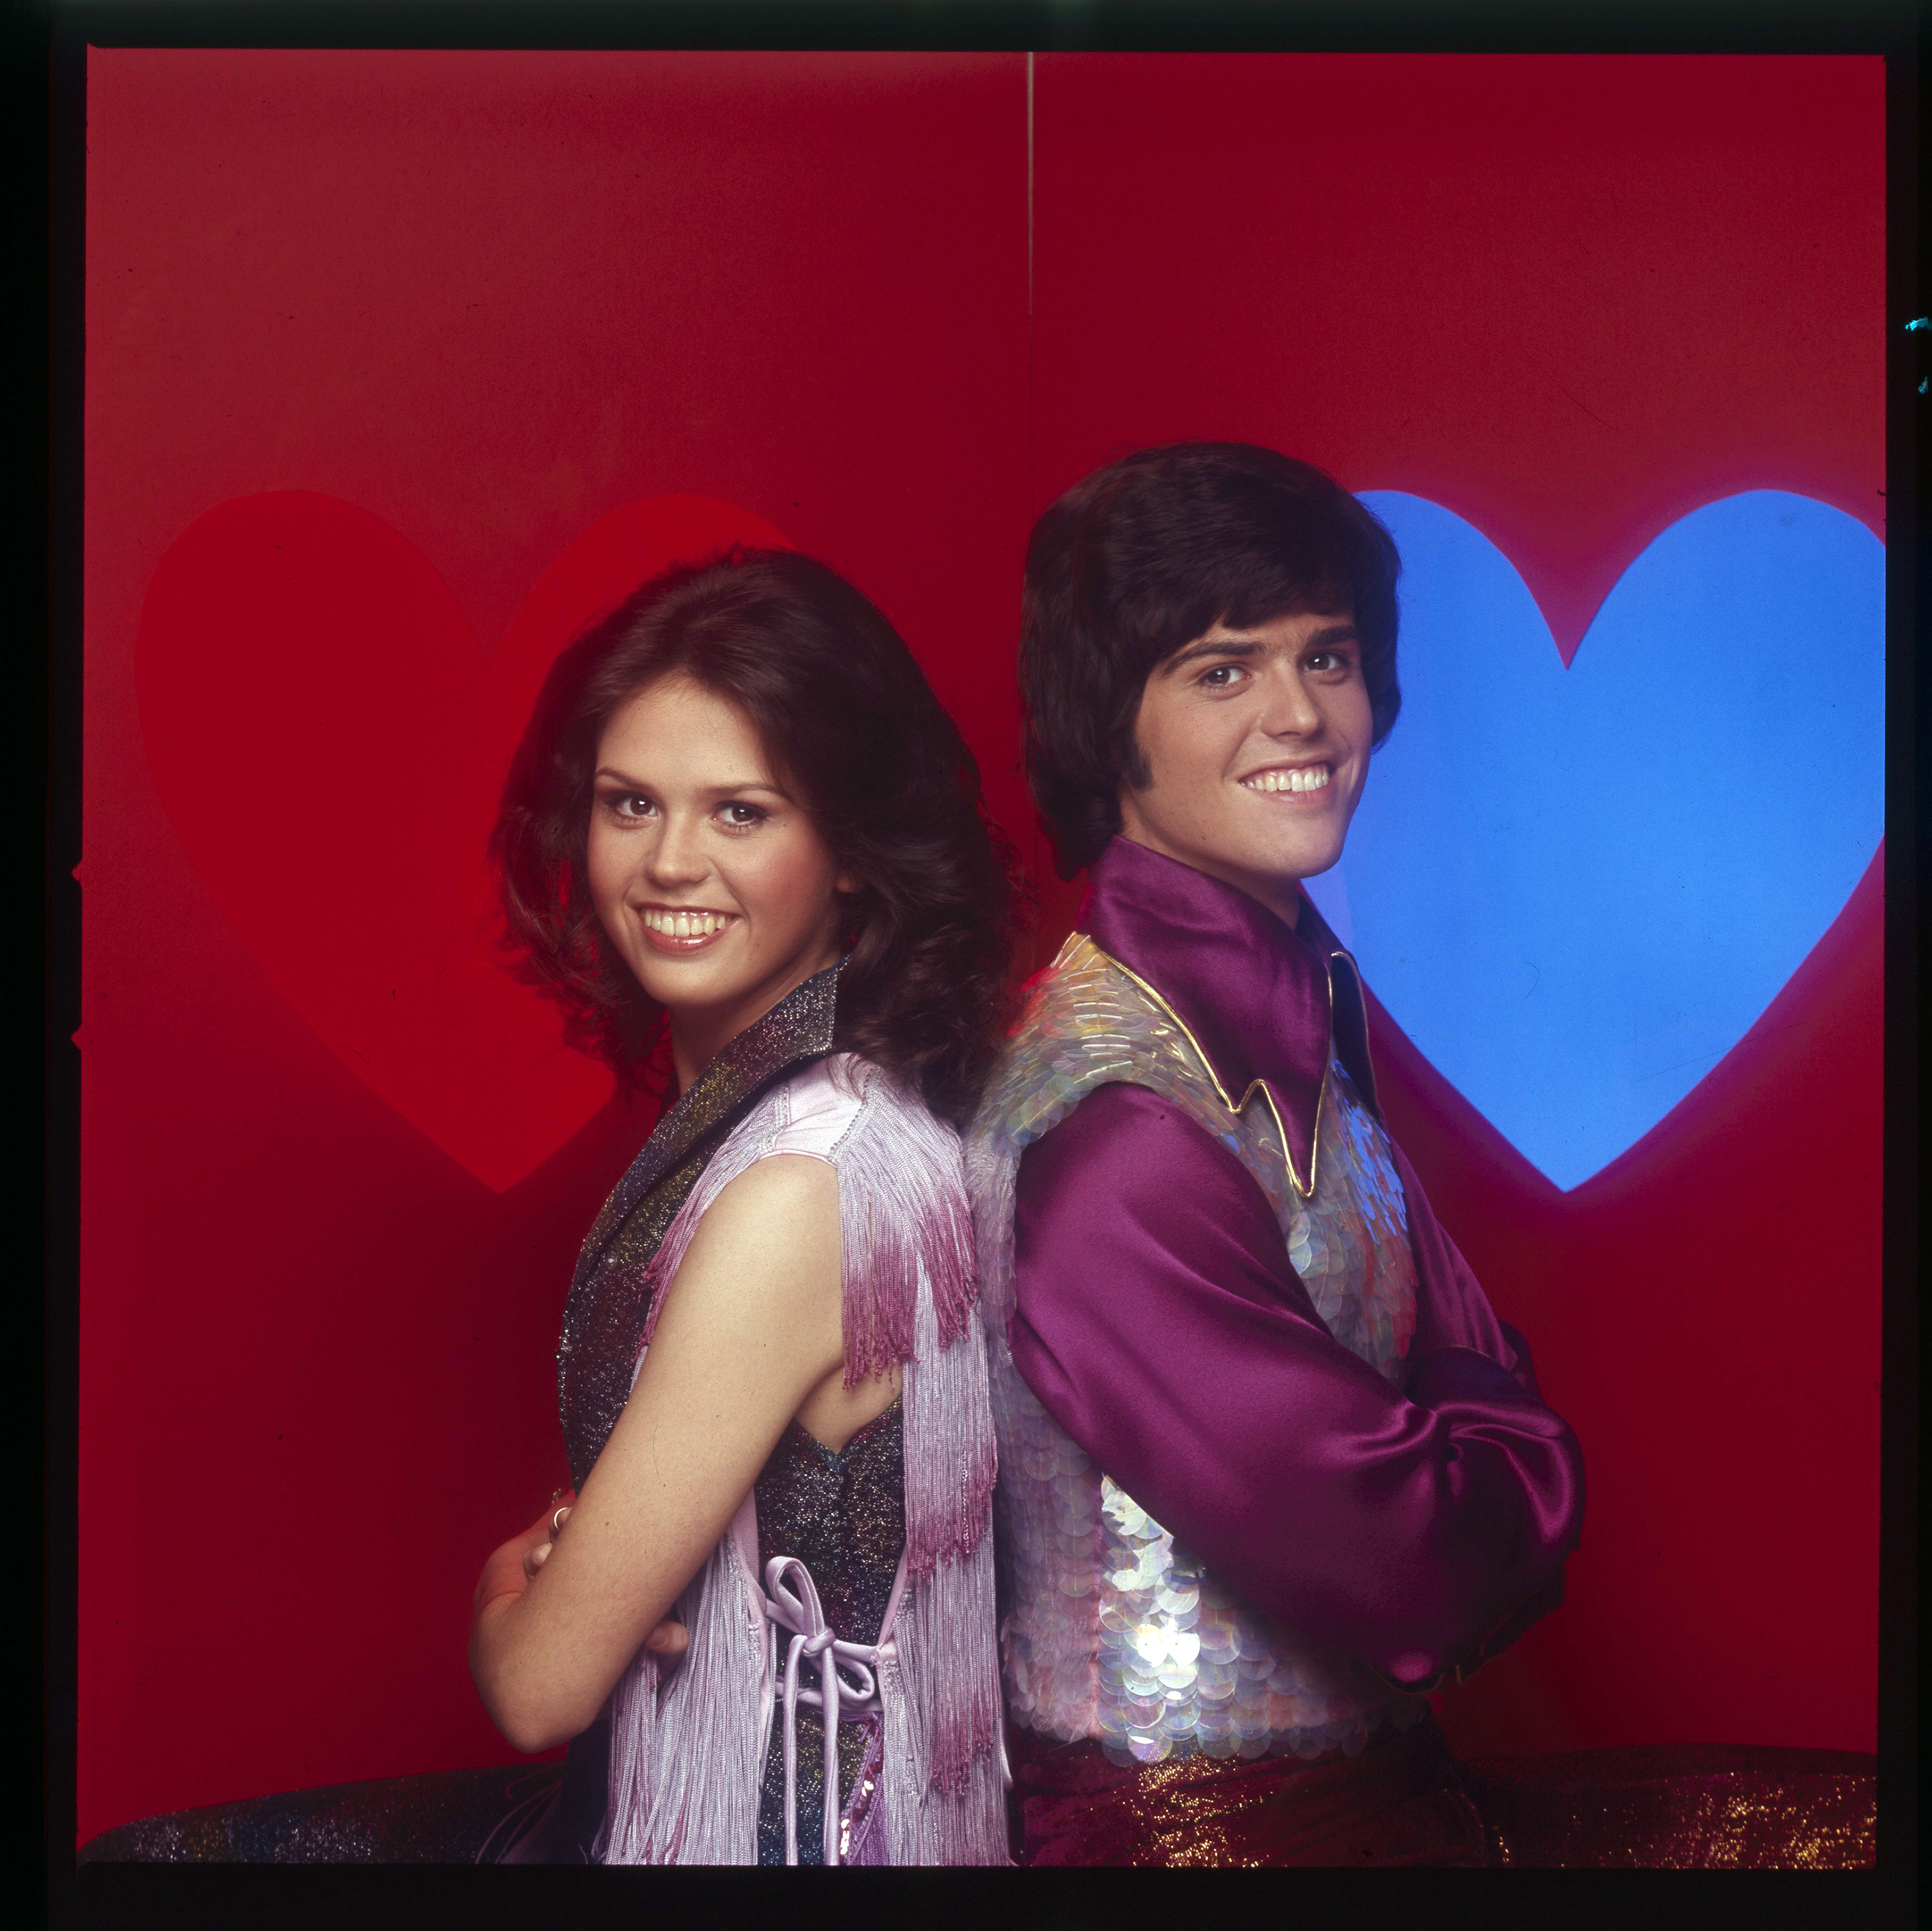 Marie Osmond and Donny Osmond on the set of “Donny & Marie” on December 8, 1975 | Source: Getty Images